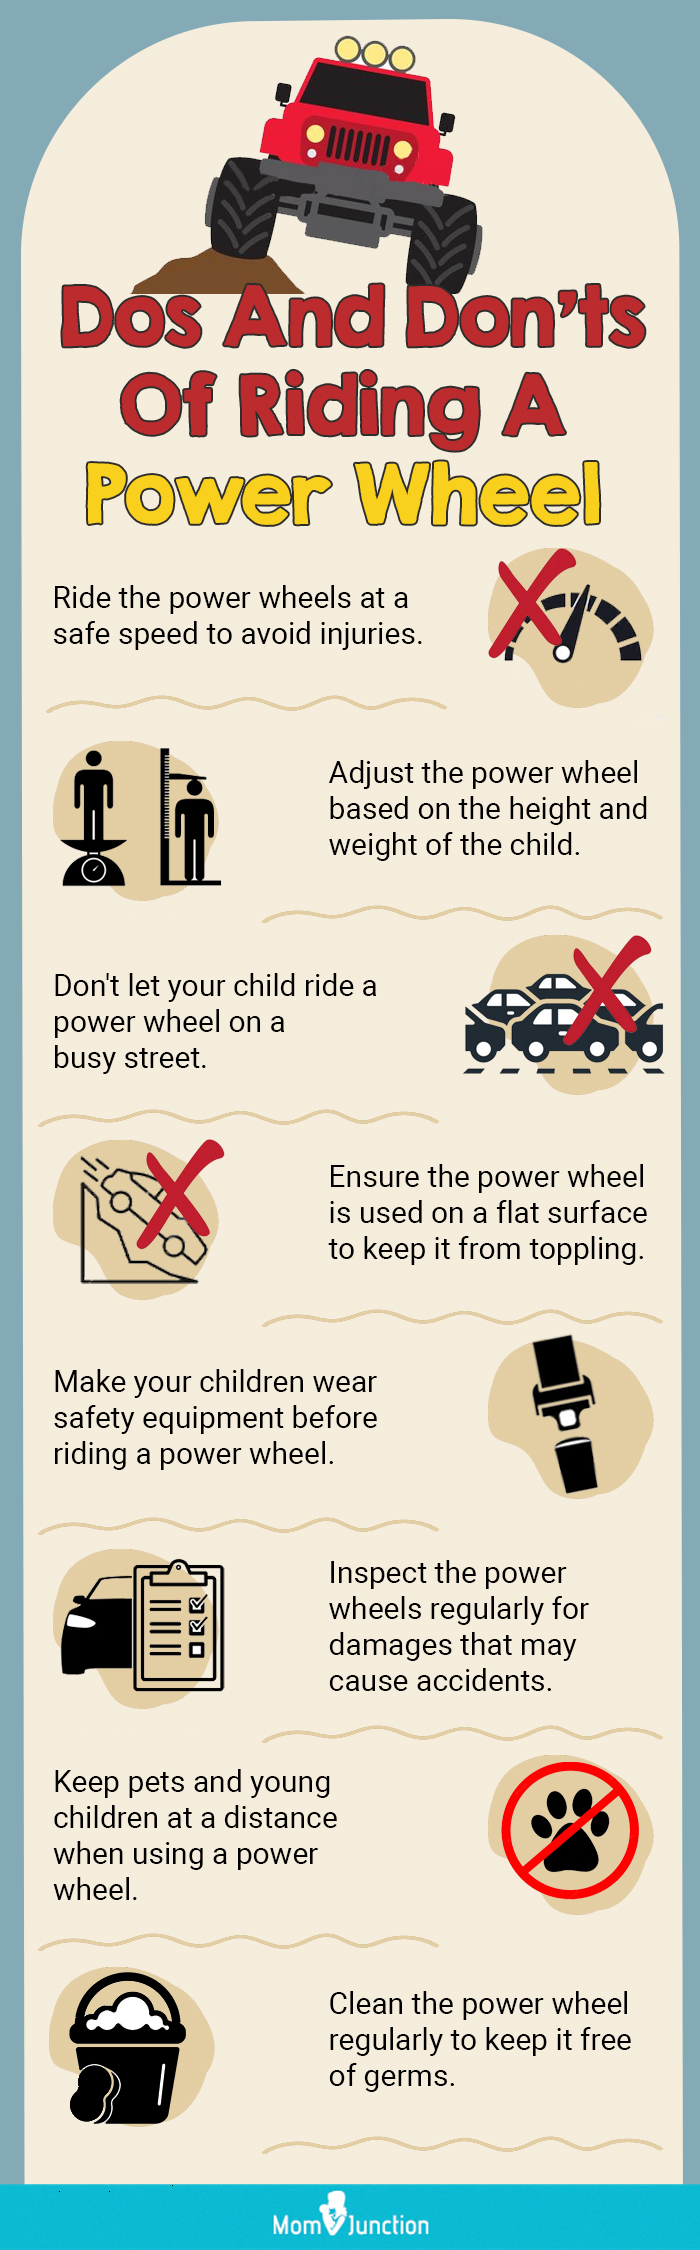 Do's And Don'ts Of Riding A Power Wheel